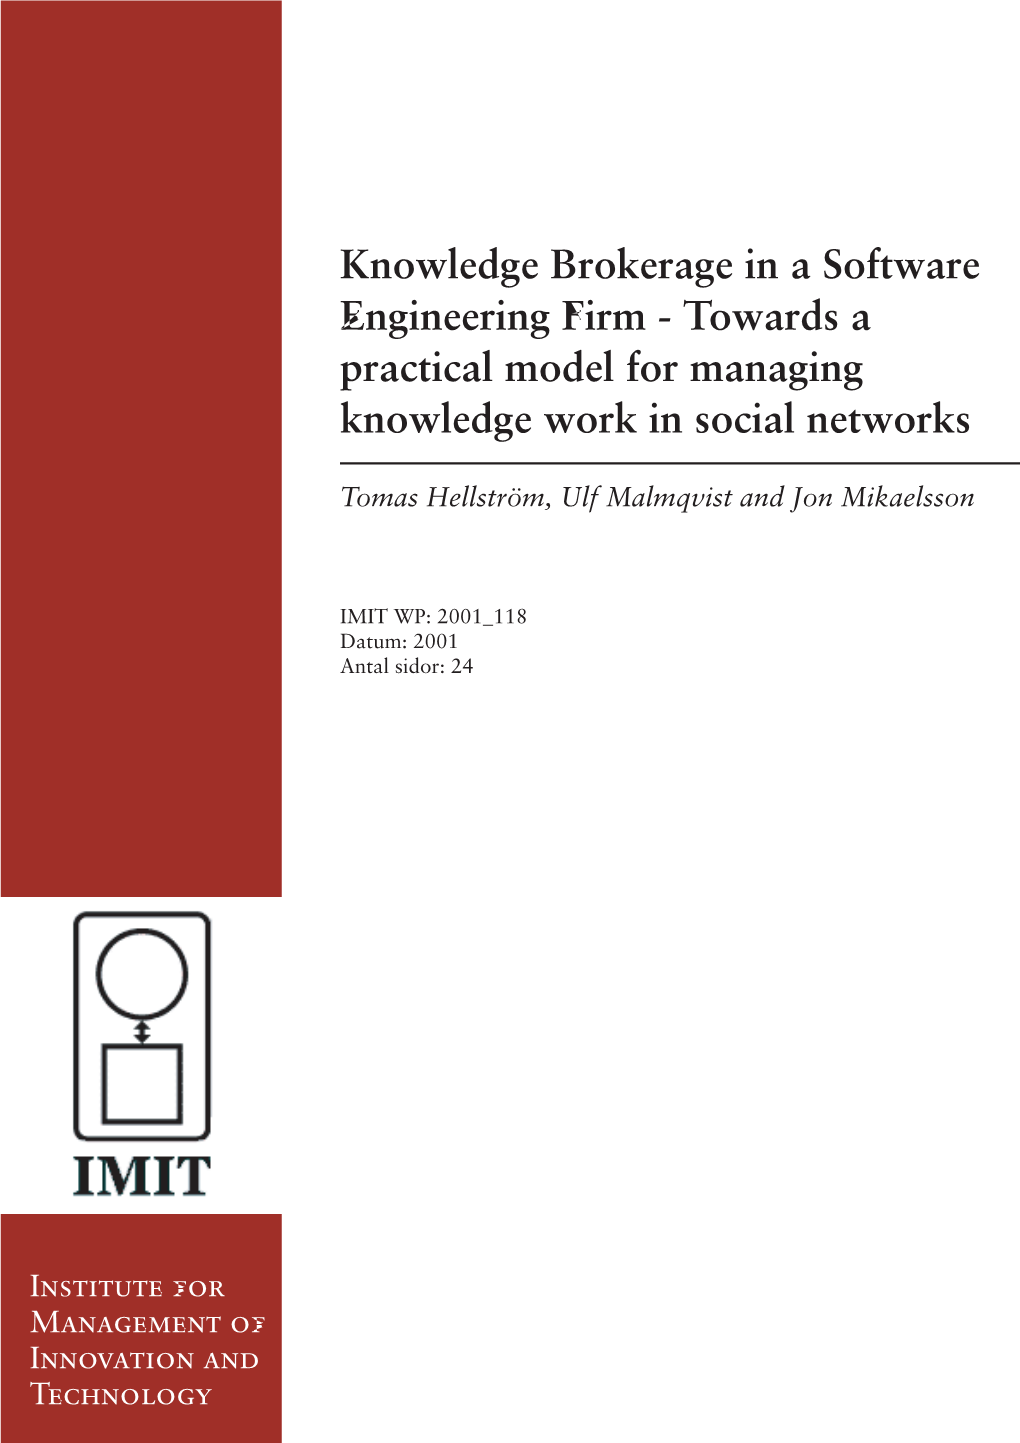 Knowledge Brokerage in a Software Engineering Firm - Towards a Practical Model for Managing Knowledge Work in Social Networks